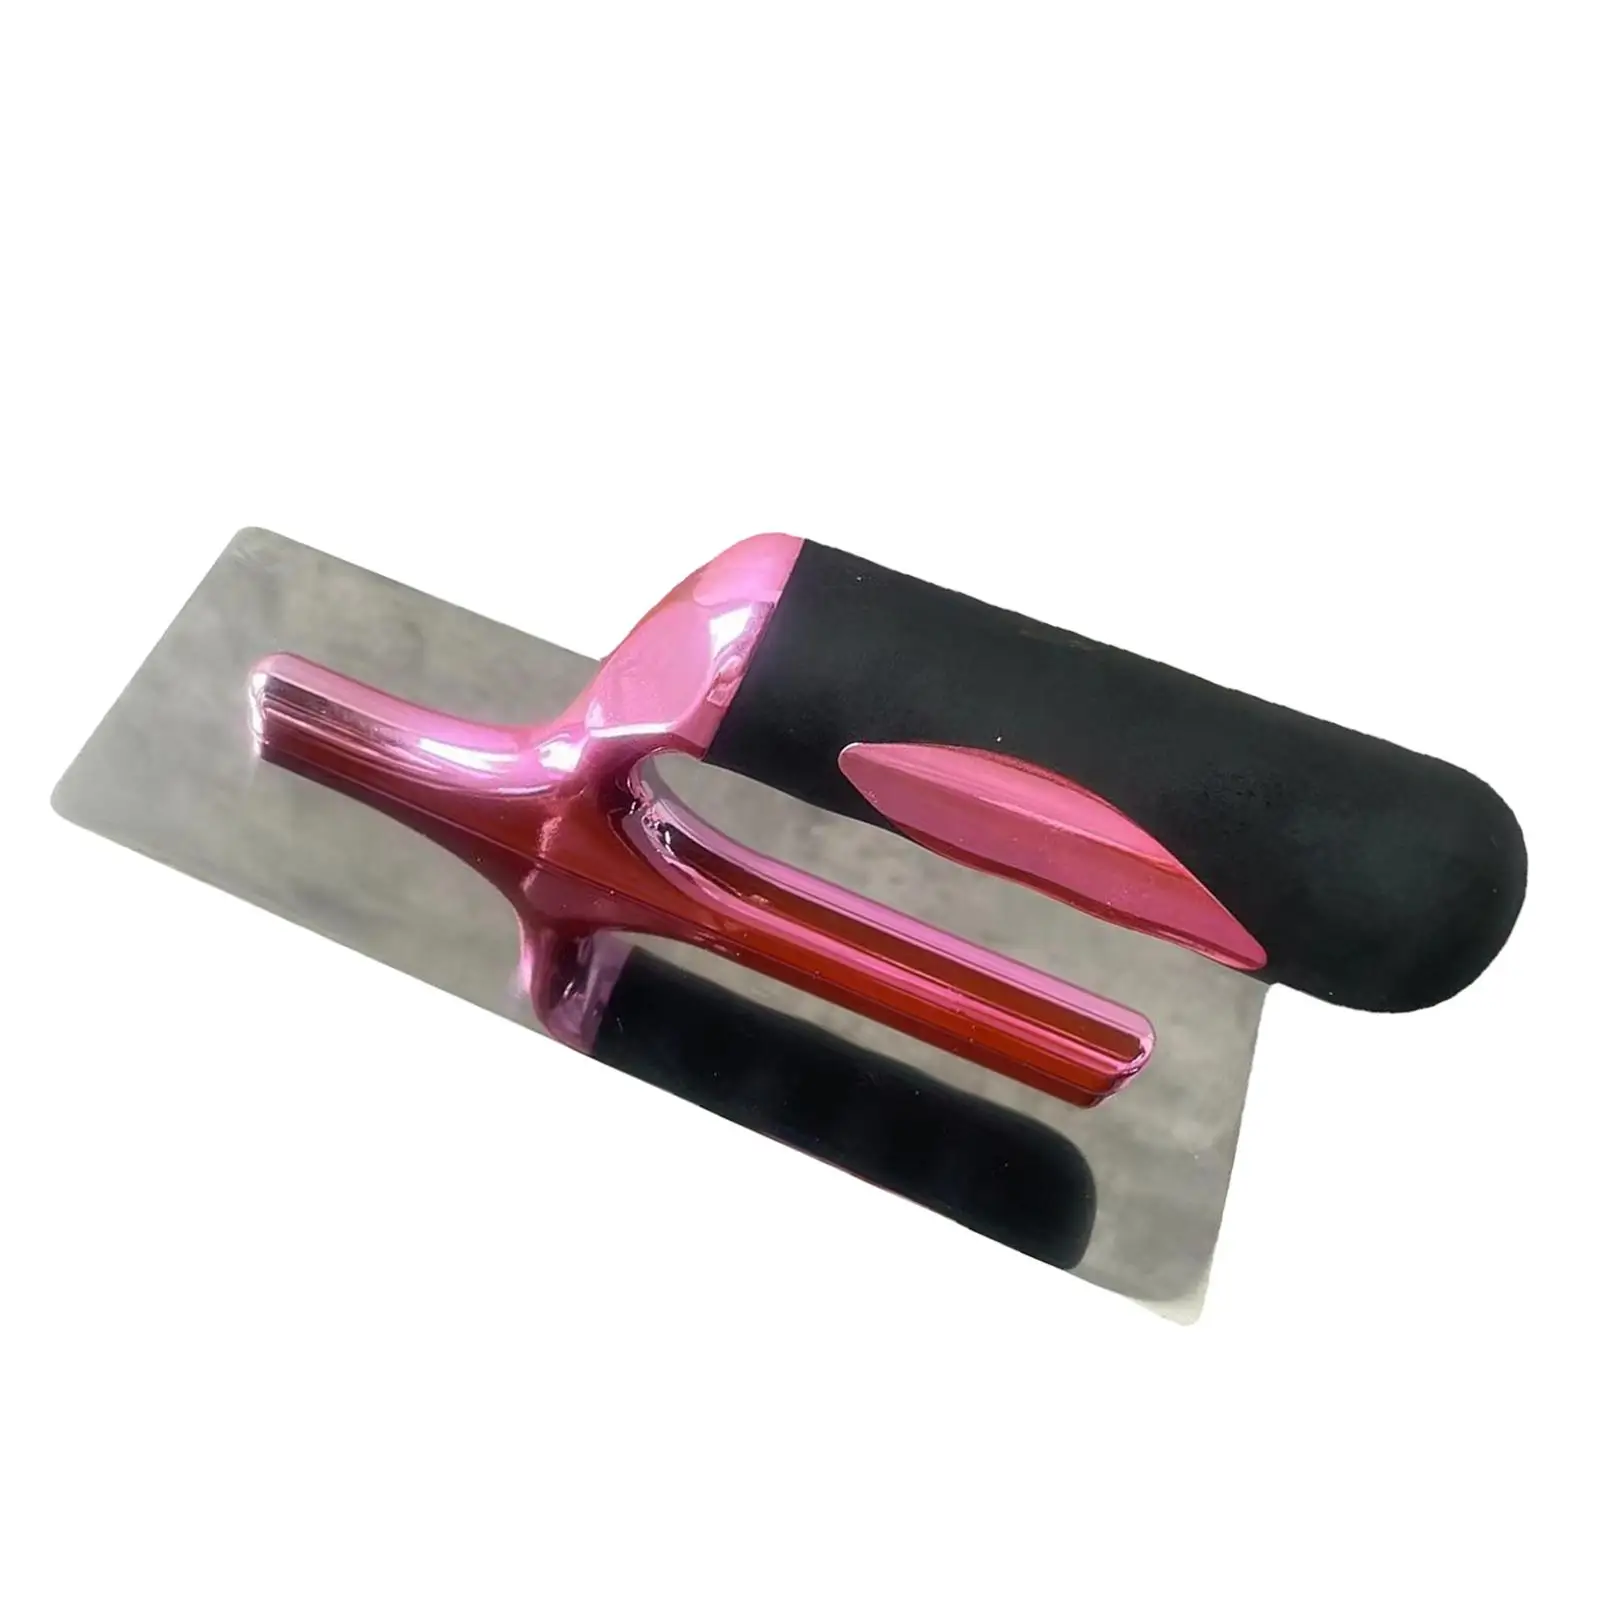 Flat Drywall Trowel Wallpaper Scraper Stainless Steel Removal Tool Plaster Finishing Trowel for Concrete Cement Home Decorating